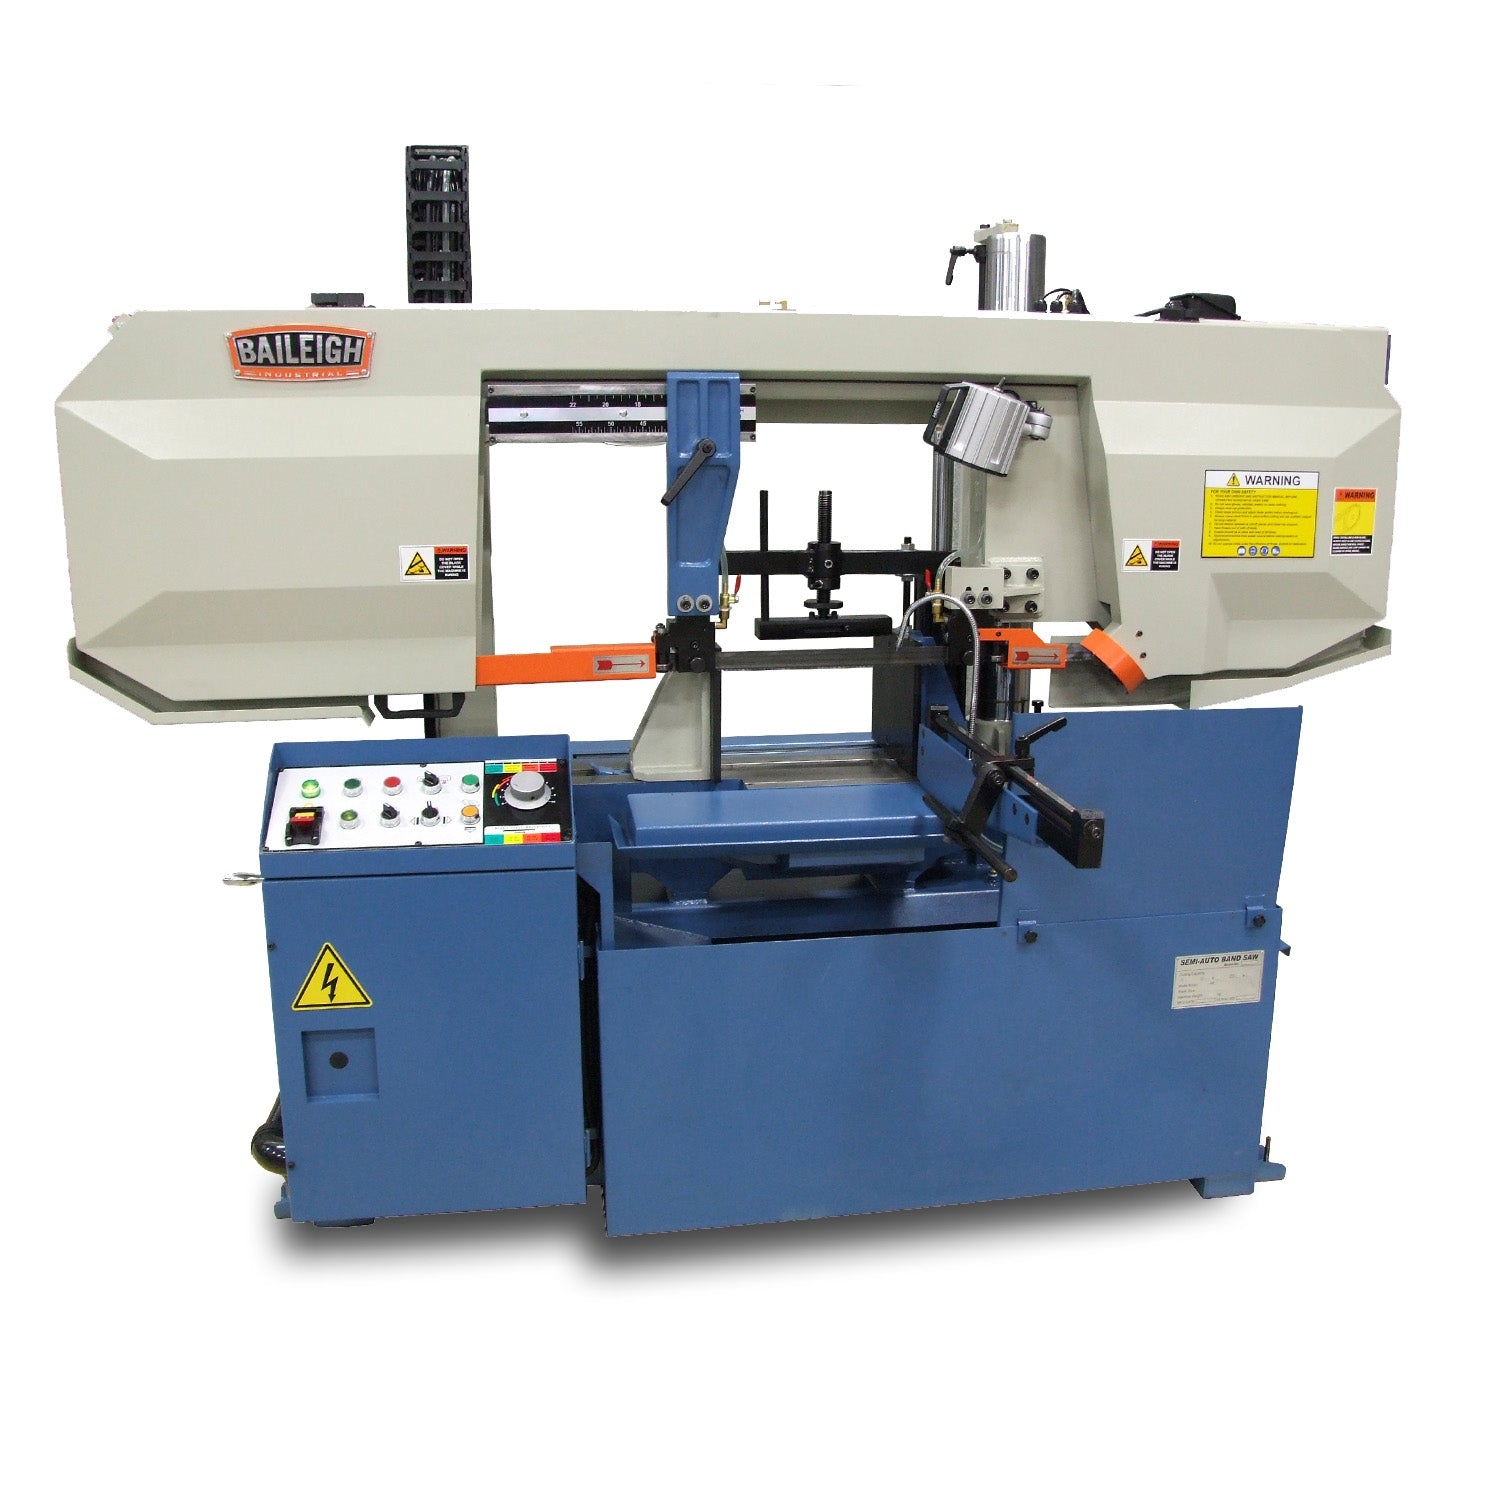 Baileigh BS-360SA 220V 3 Phase Column Type (Non-Mitering) Metal Cutting Band Saw 1-1/4" Blade Width